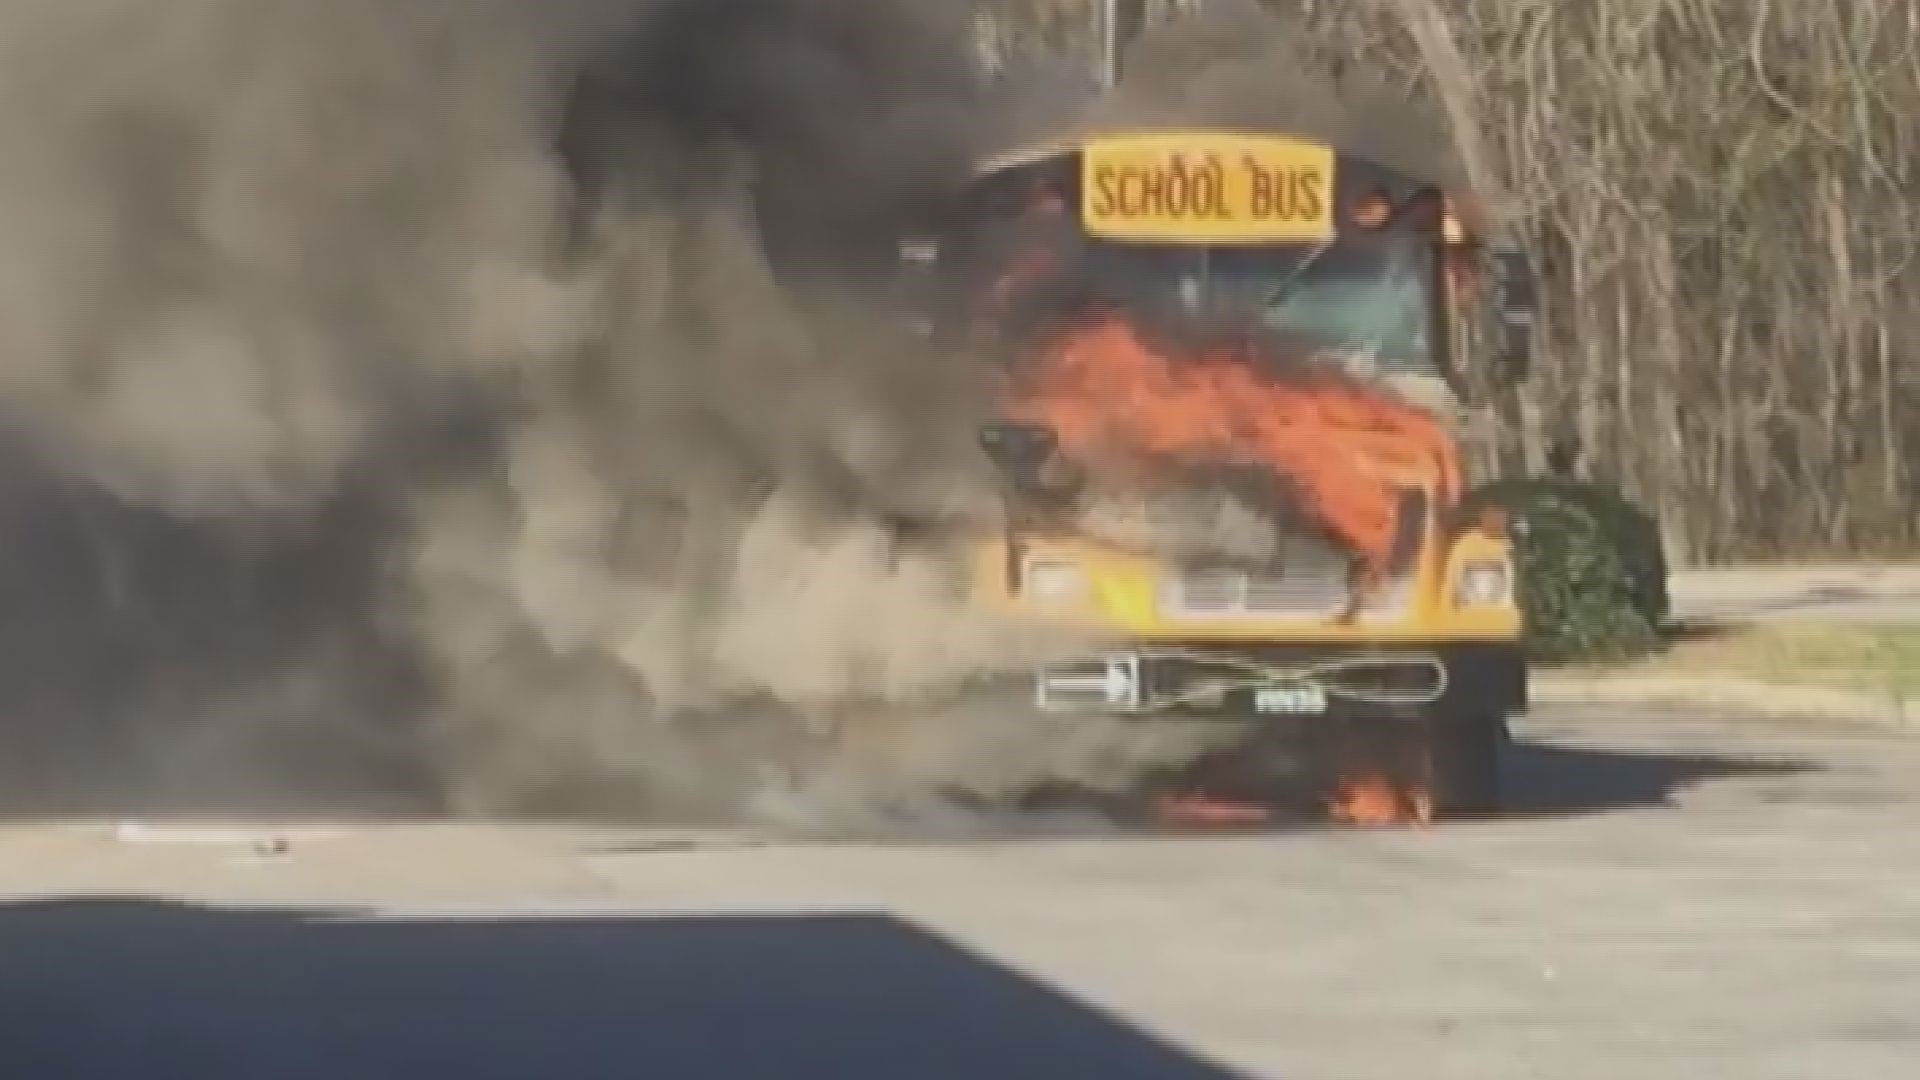 A bus carrying a group of kindergartners in Columbia, SC broke down and caught fire Monday, but none of the students aboard were hurt.